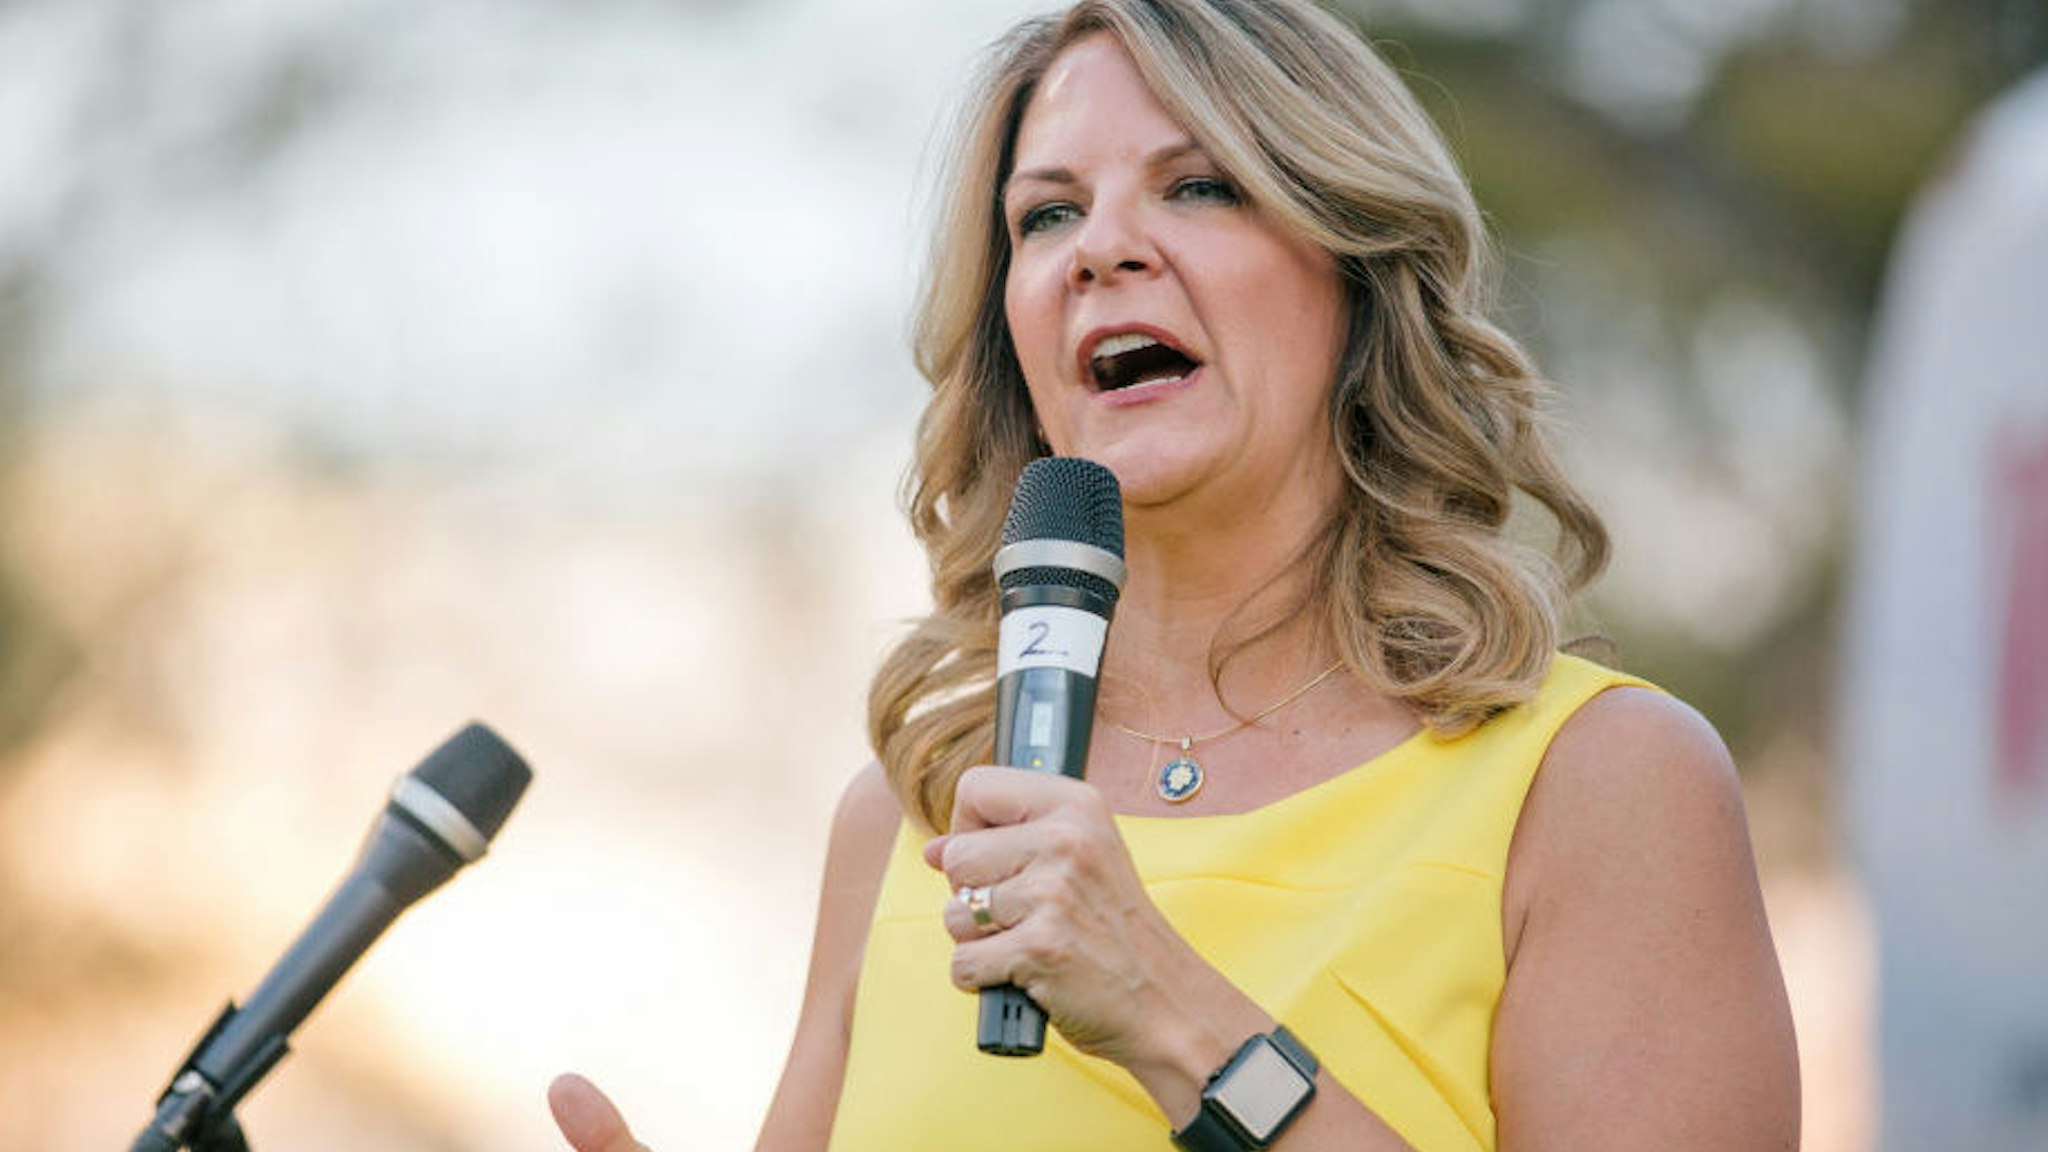 Kelli Ward, Republican U.S. Senate candidate from Arizona, speaks during the 'Road To Victory' bus tour stop at the Pioneer Living History Museum in Phoenix, Arizona, U.S., on Friday, Aug. 24, 2018.